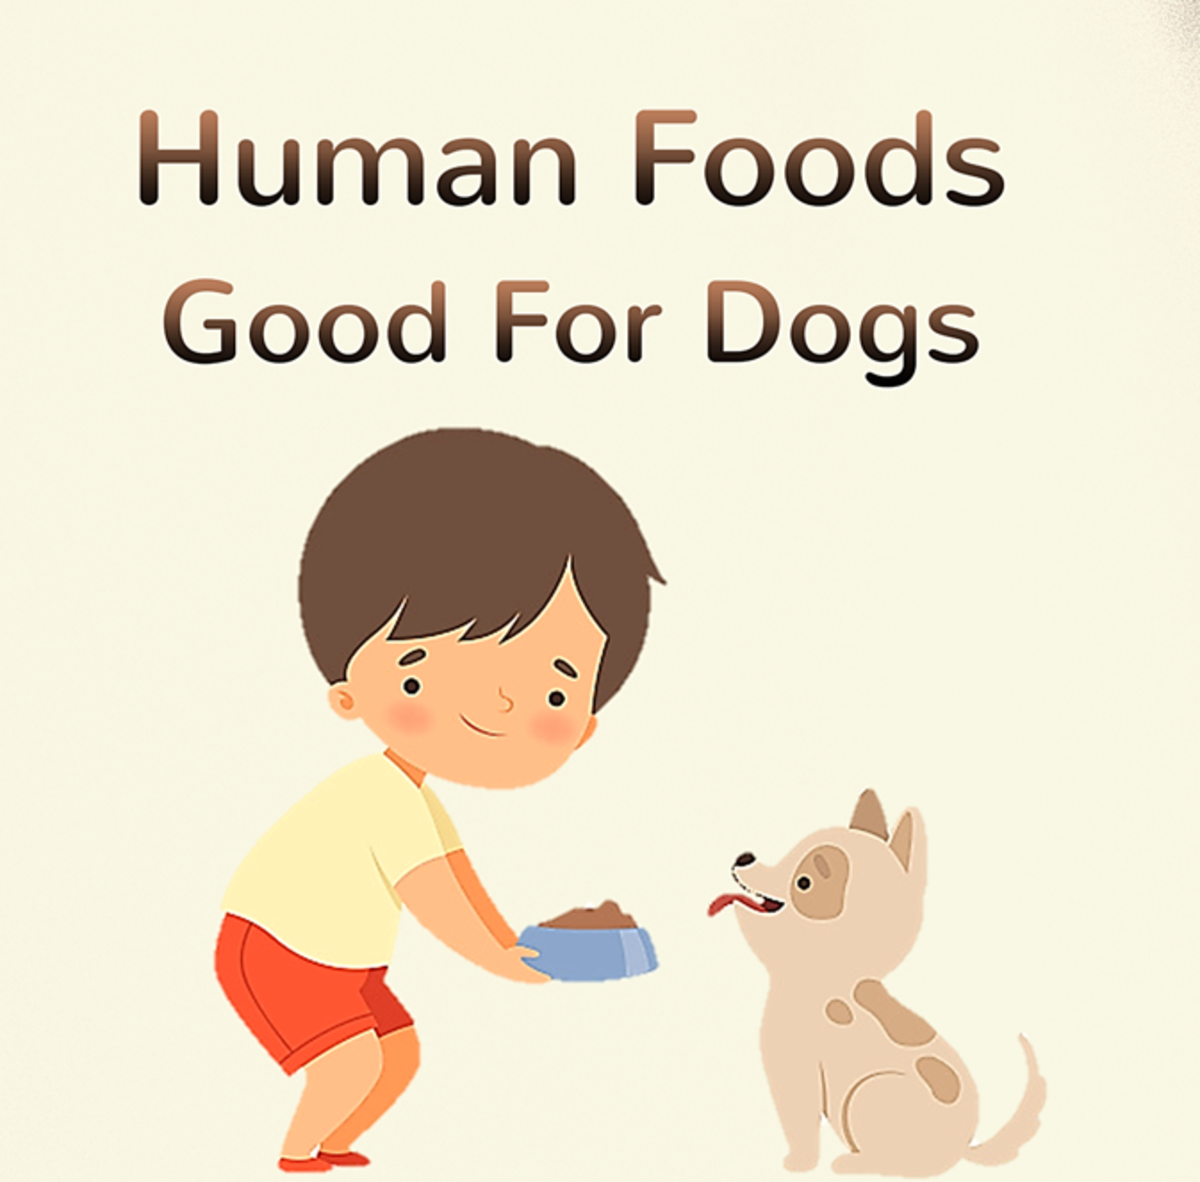 Human Foods Good For Dogs